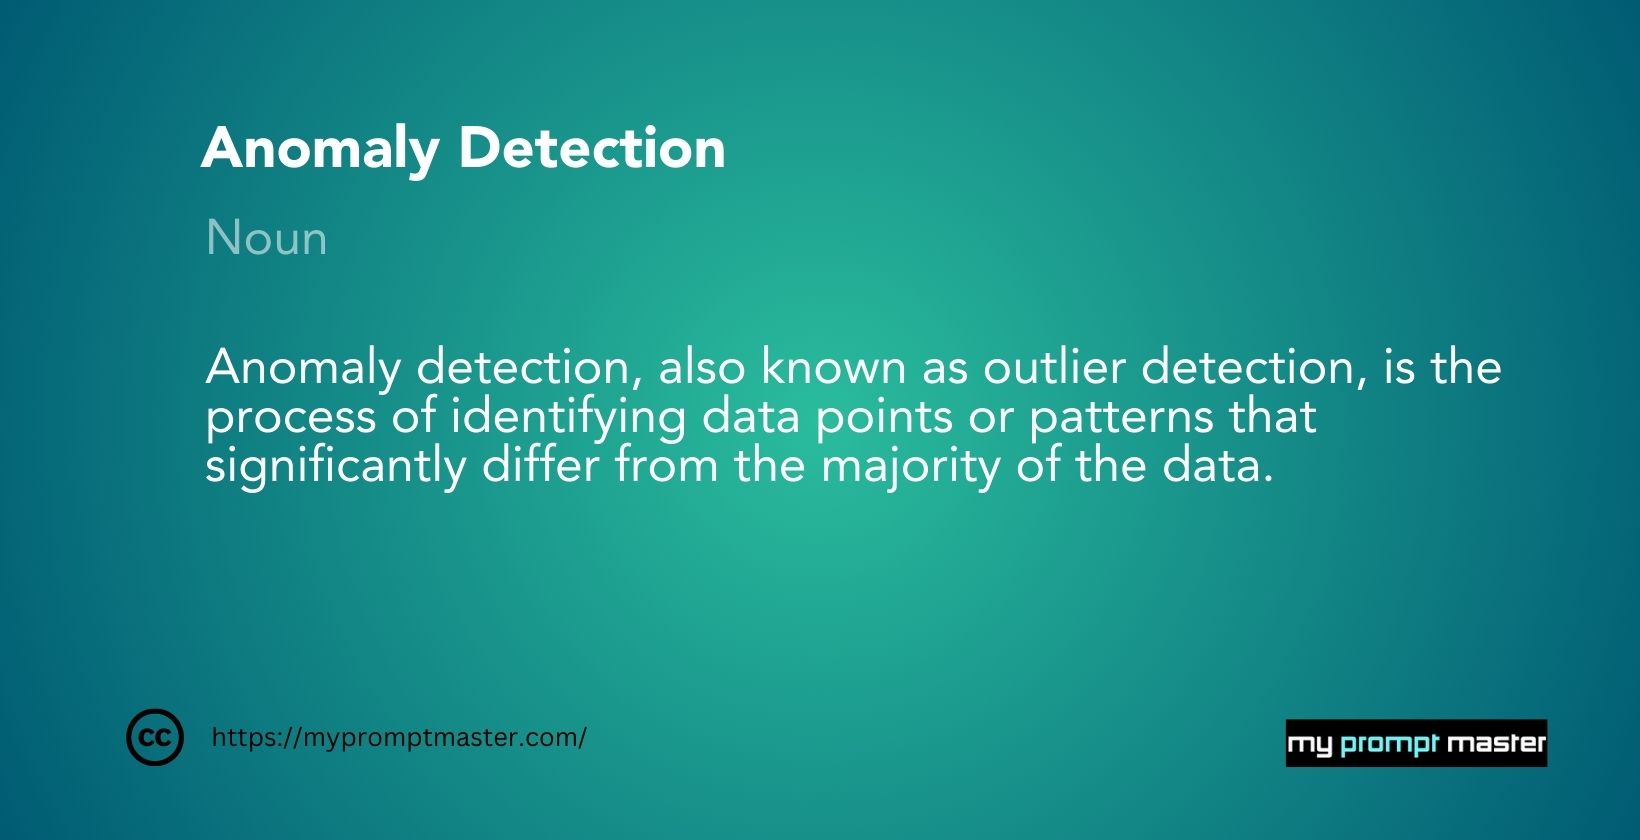 What is Anomaly Detection